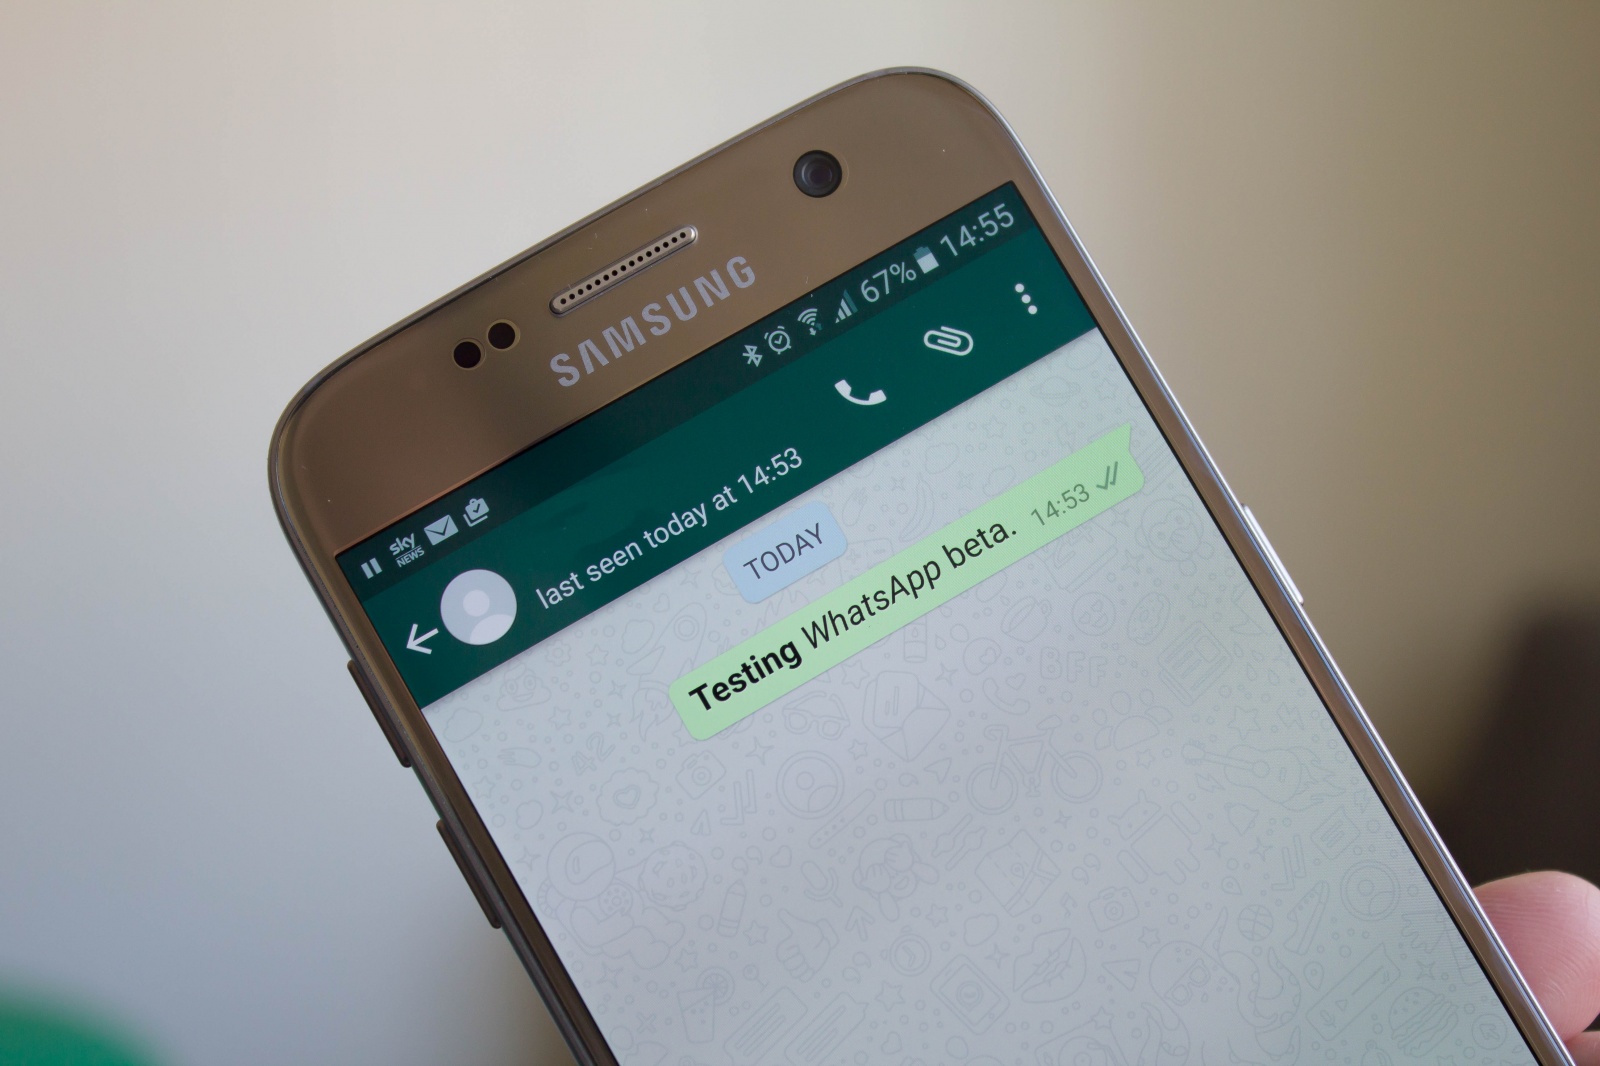 whatsapp-beta-adds-support-for-bold-and-italic-text-image-cultofandroidcomwp-contentuploads201603WhatsApp-text-formatting-jpg